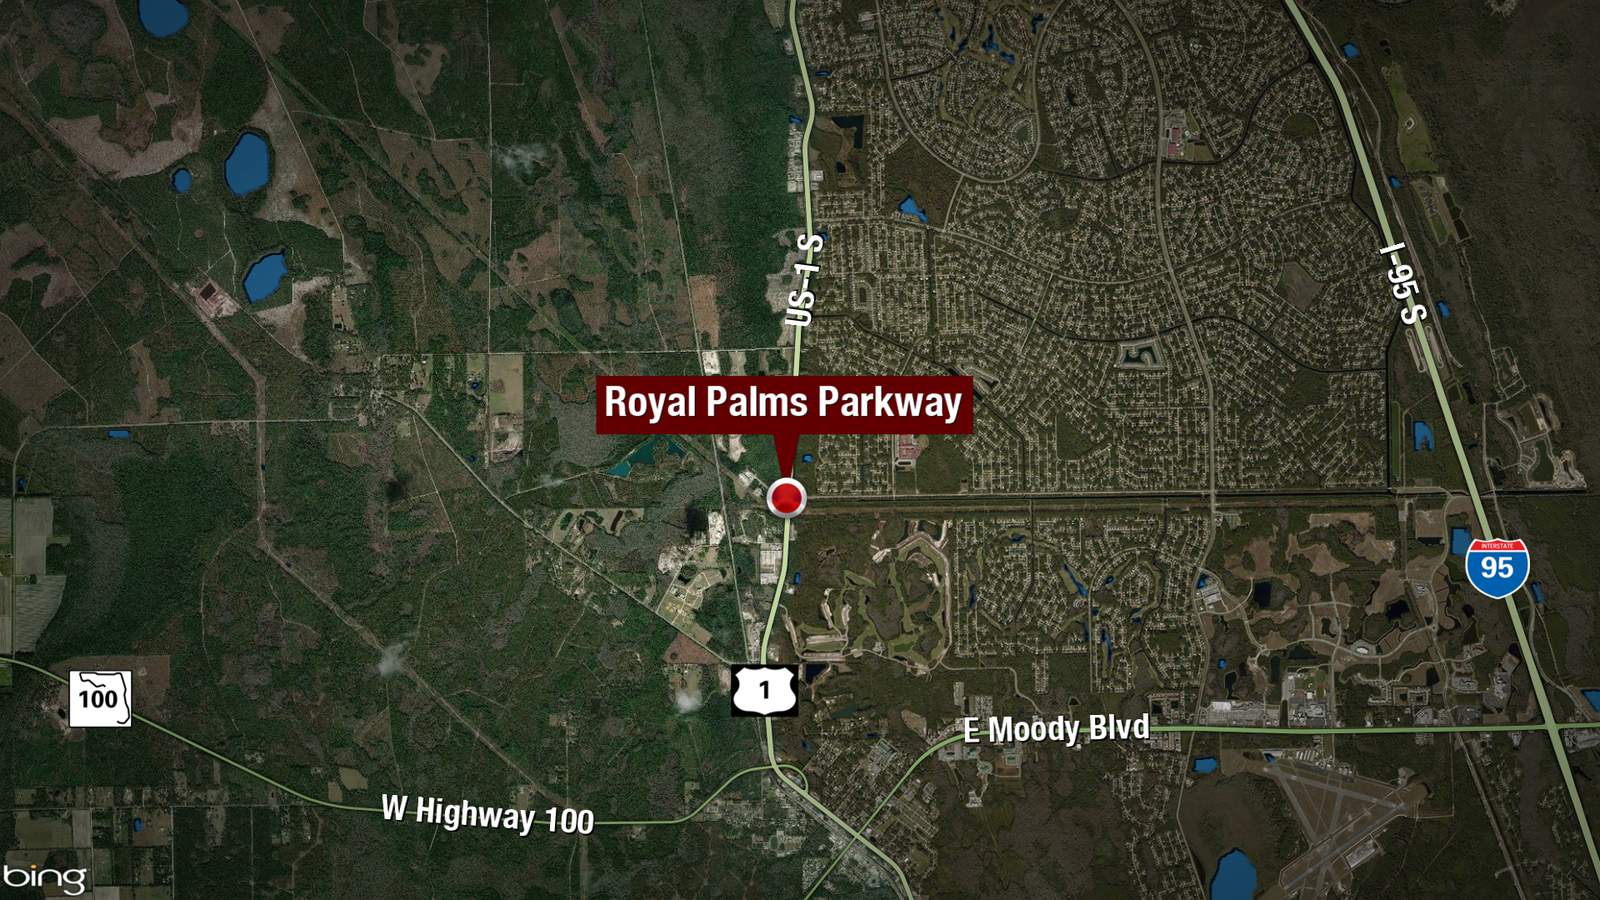 Driver dies as Jeep hits tree, returns to U.S. 1 in Flagler County